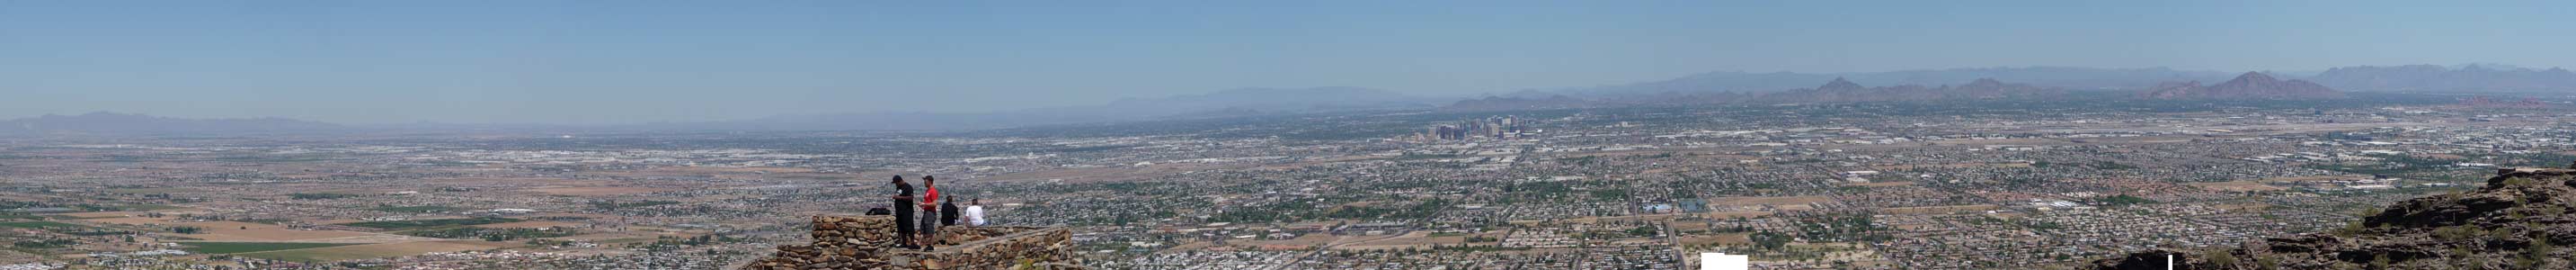 Panorama view looking north from South Mountain Park